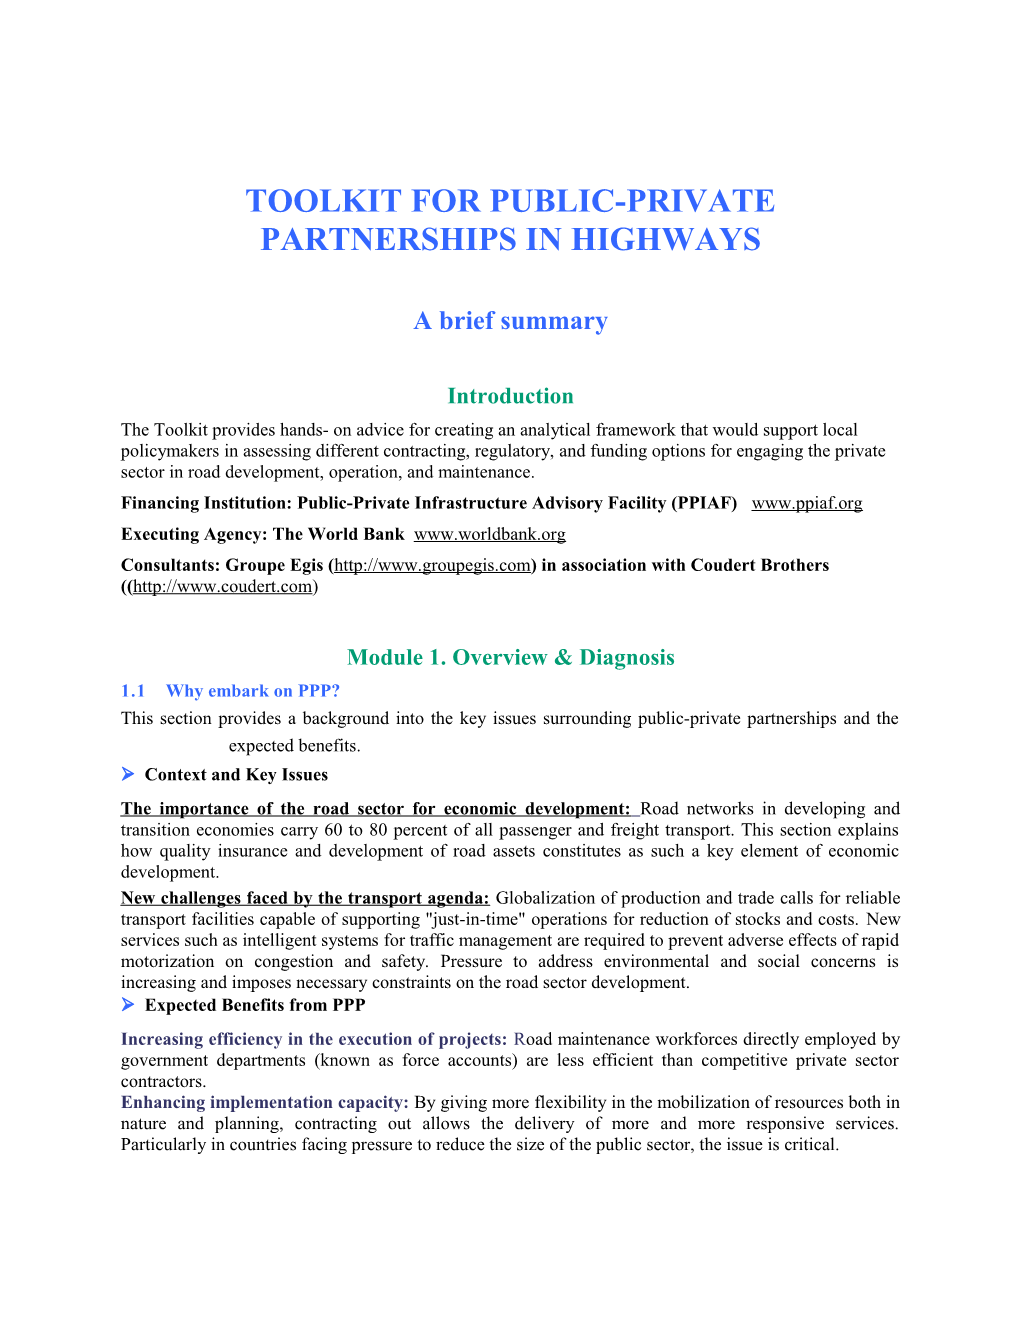 Toolkit for Public-Private Partnerships in Highways